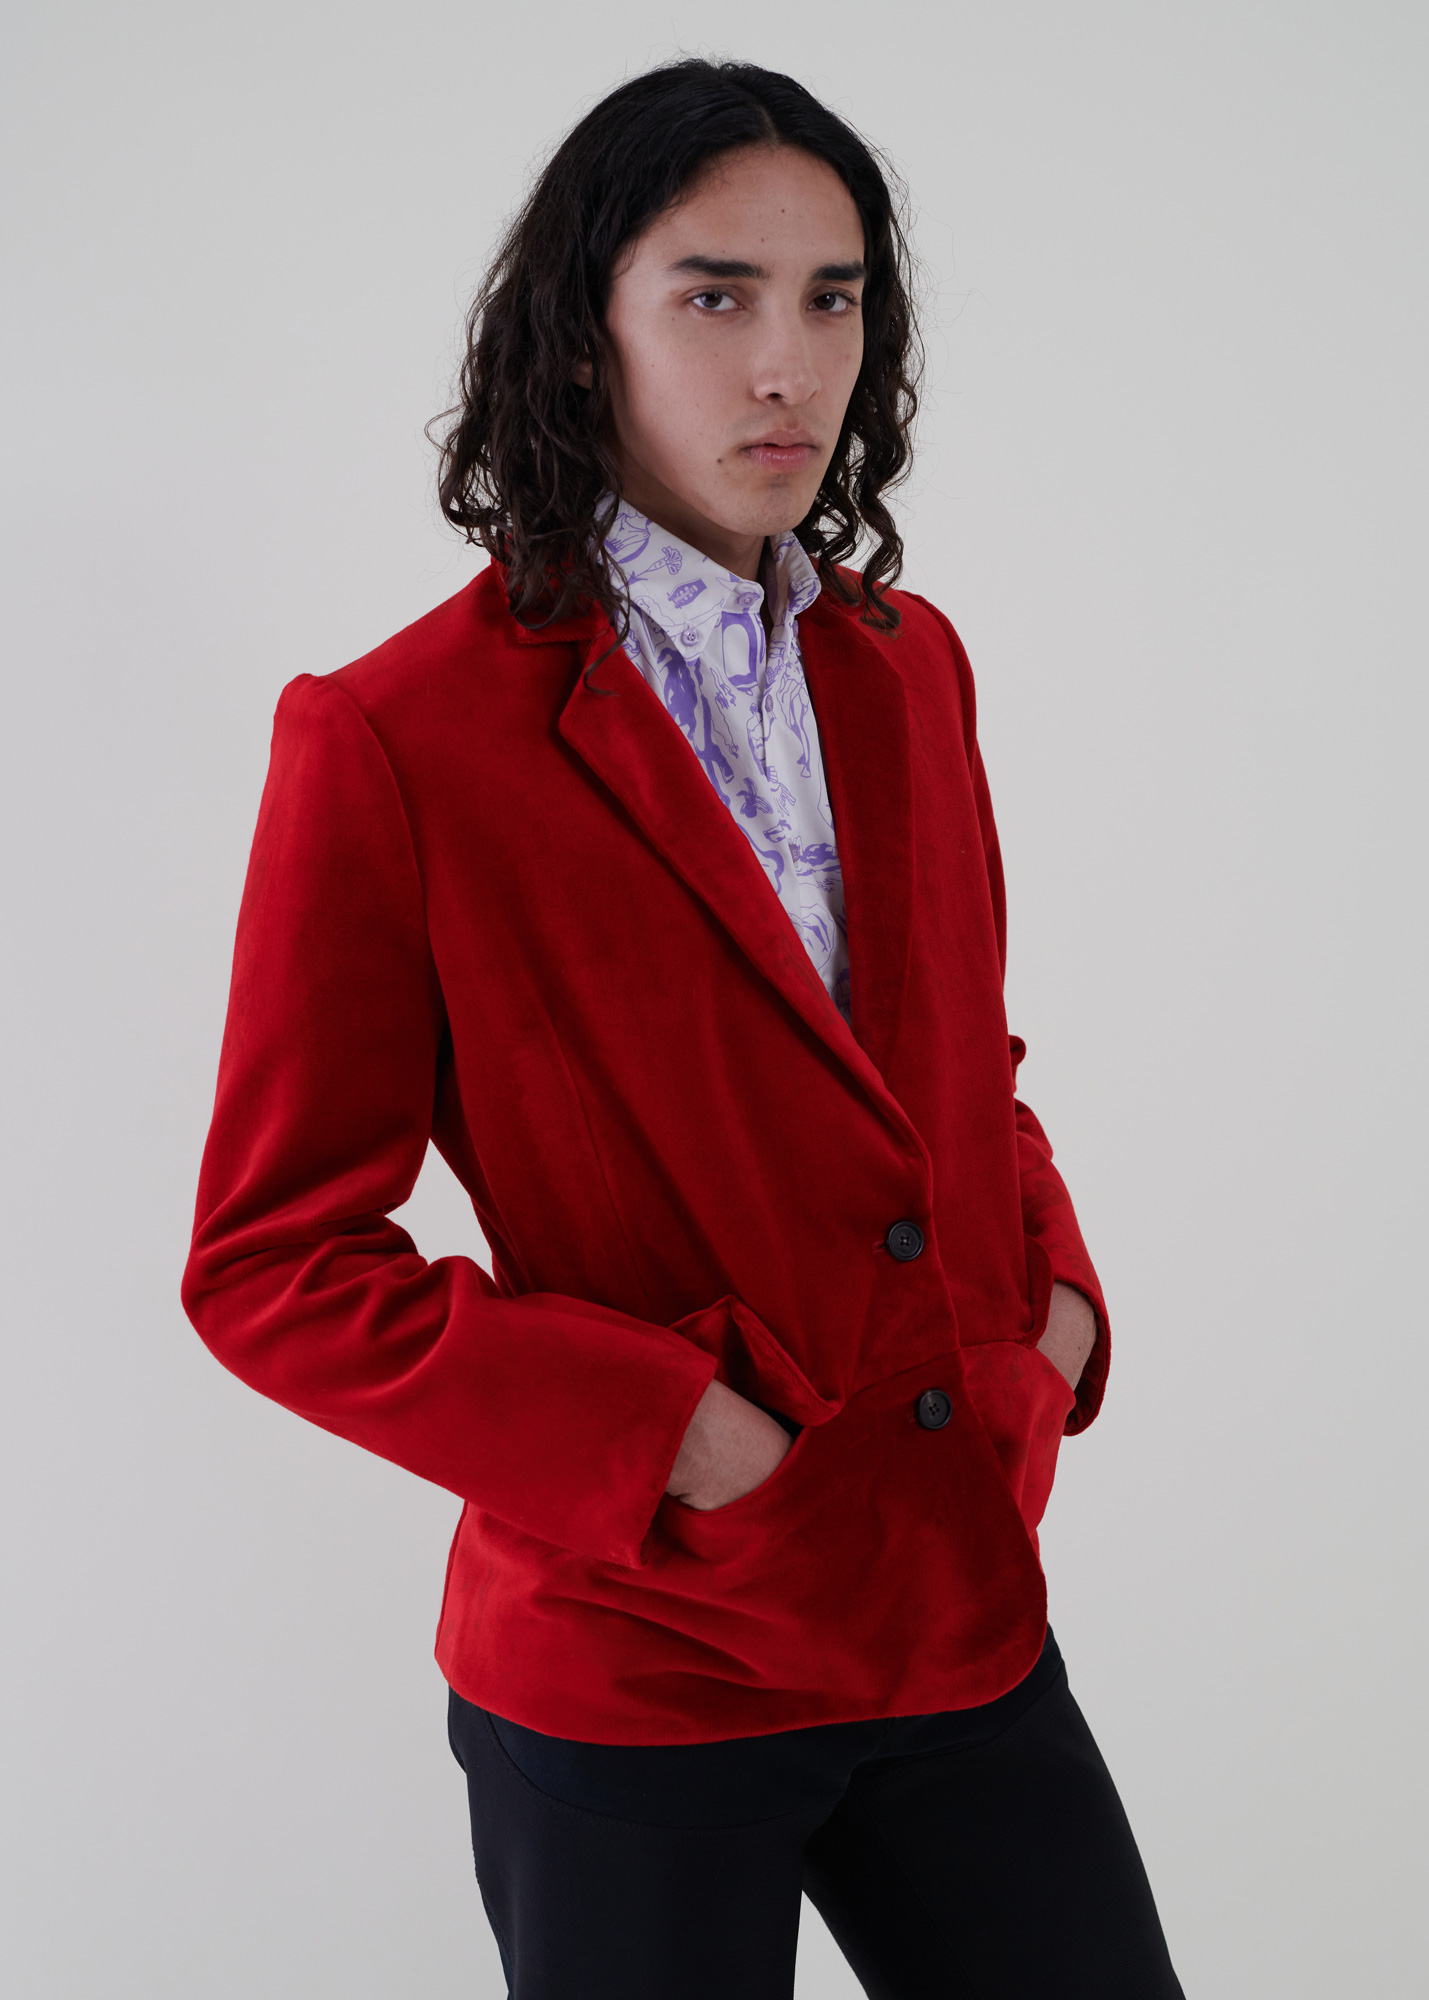 Sustainable fashion with upcycled cotton velvet tailored jacket from Aldwin Teva William